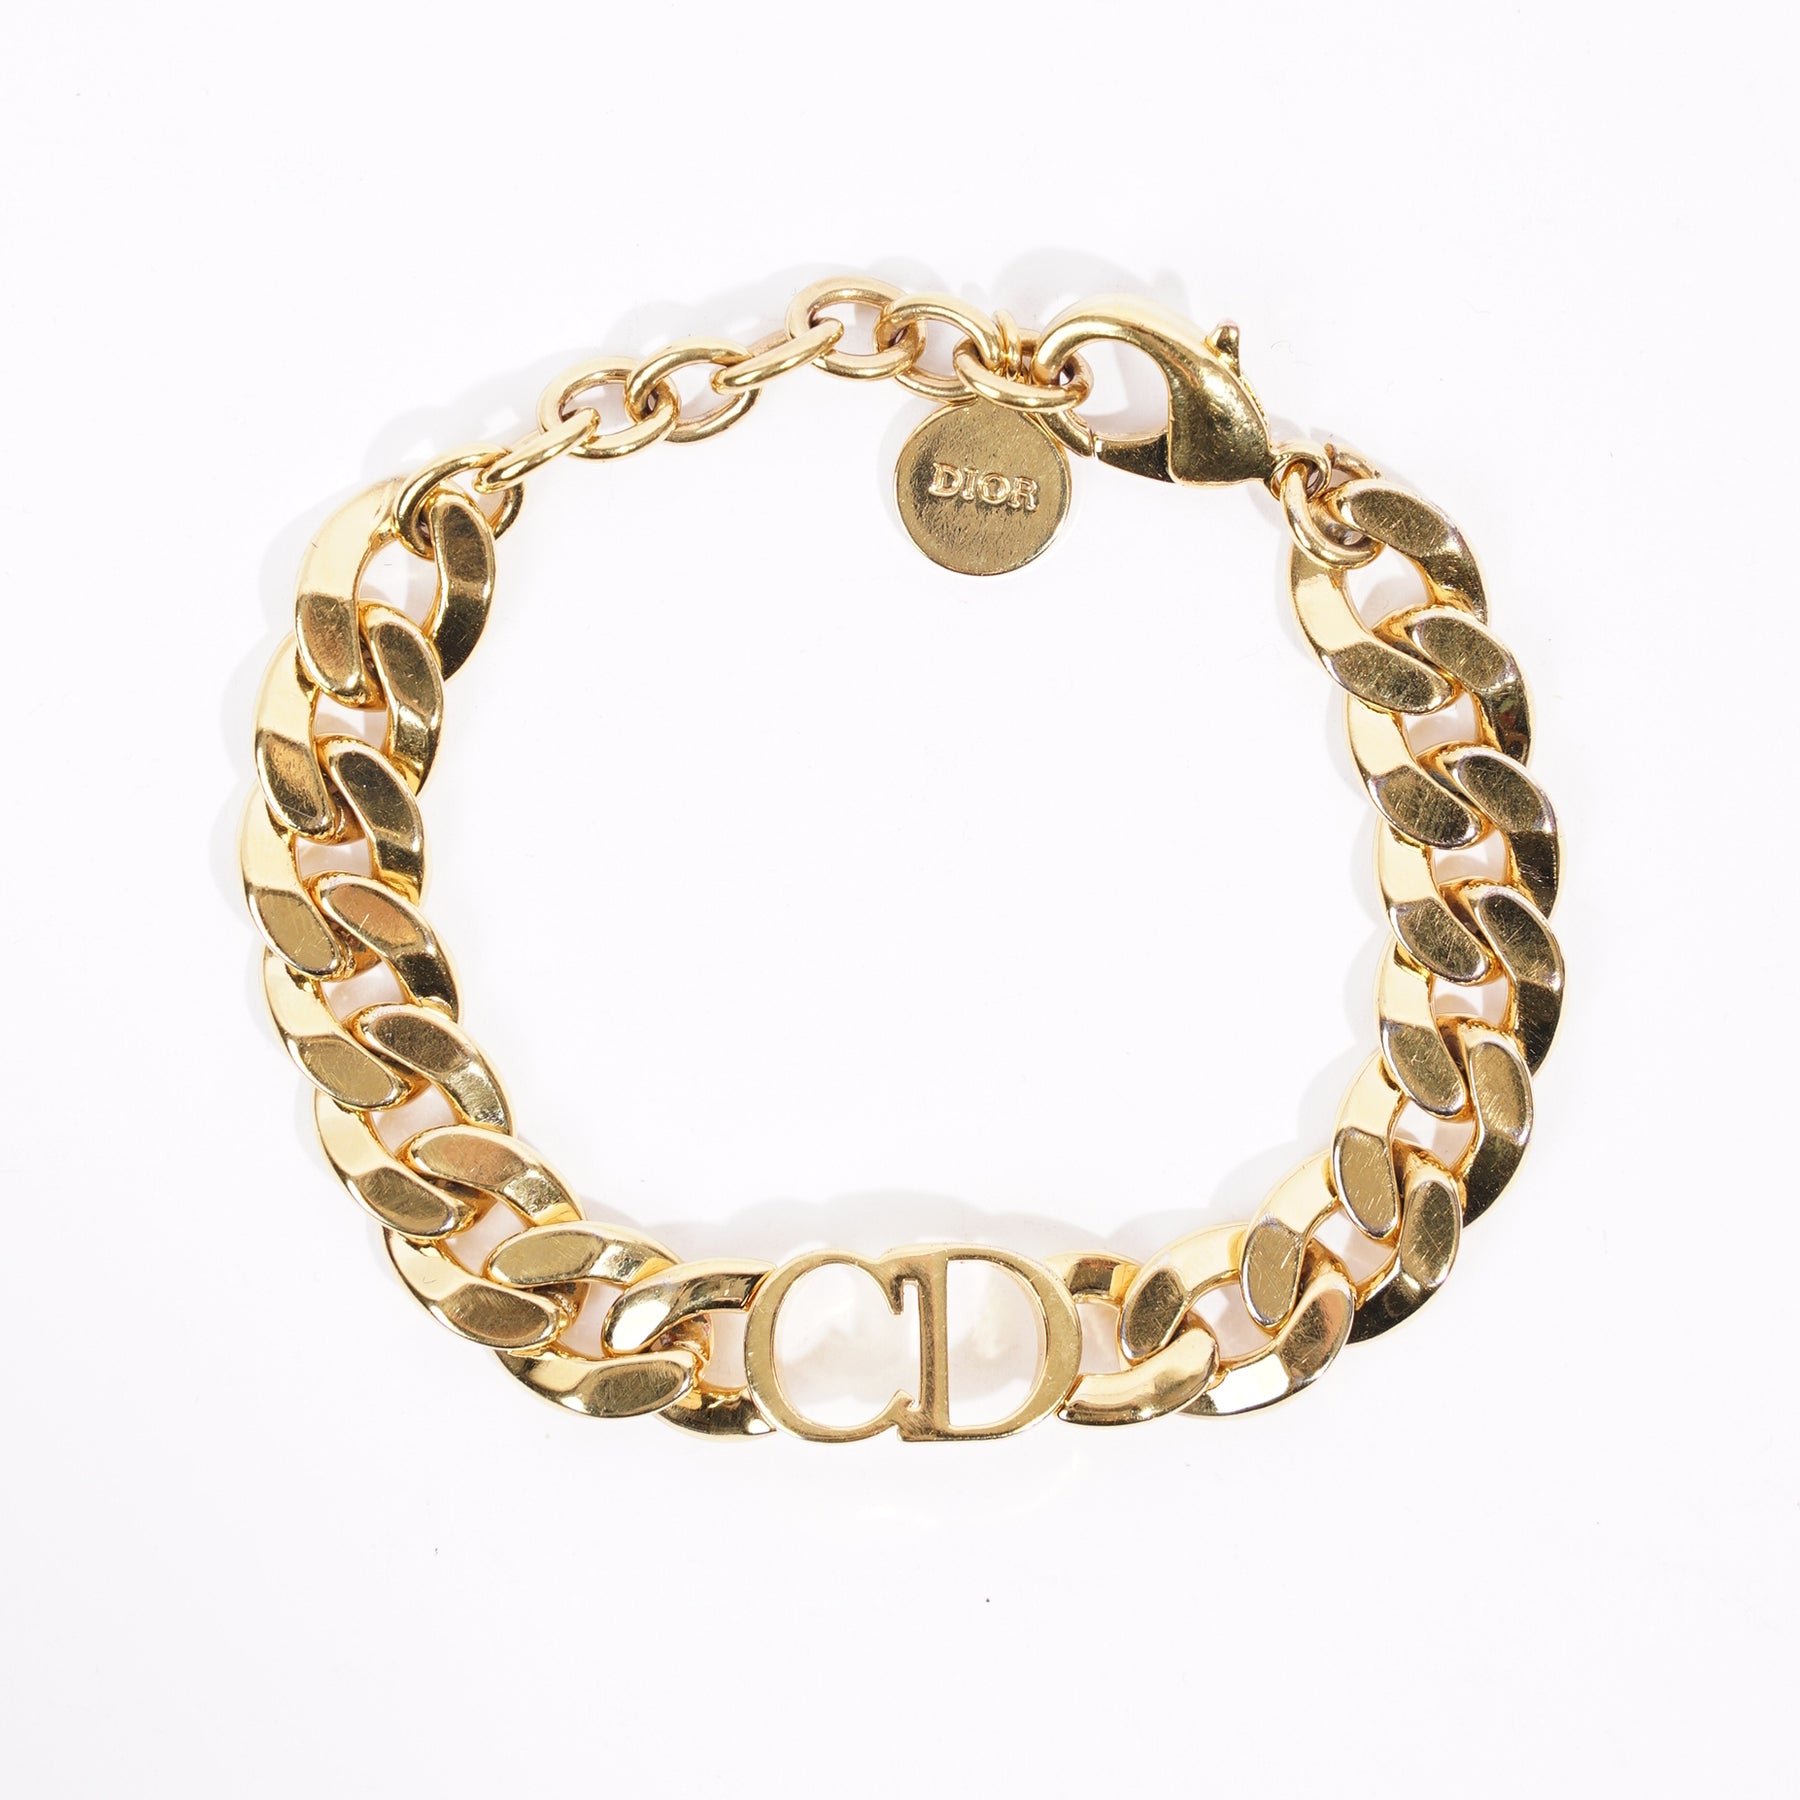 Christian Dior bracelet, Luxury, Accessories on Carousell